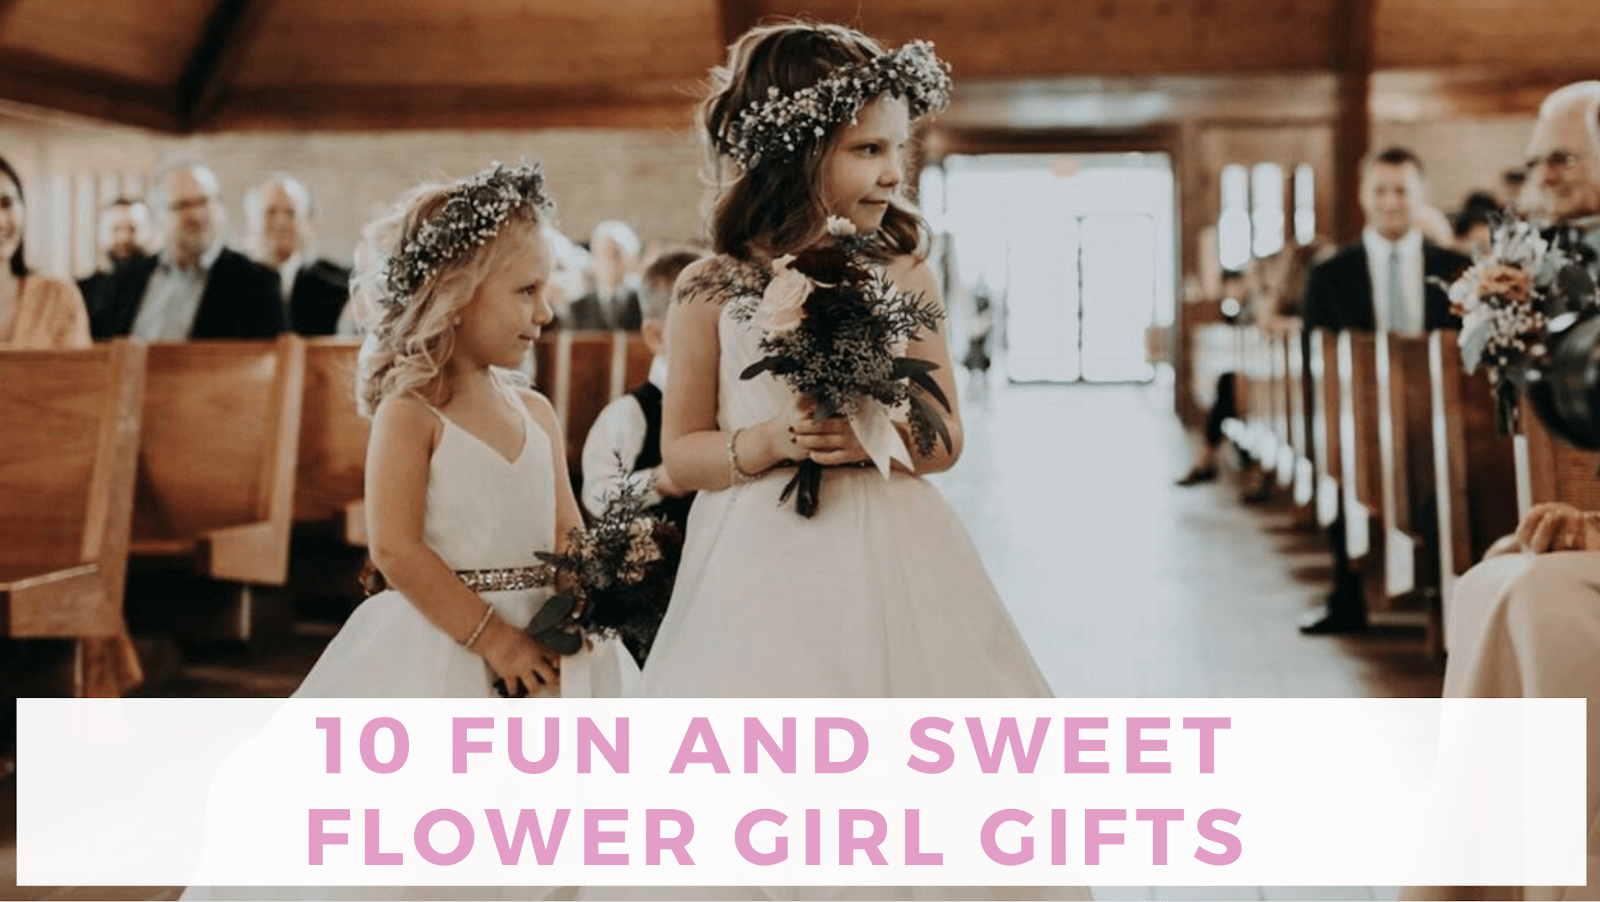 Here are 5 Bridal Shower Gift Ideas You'll Love by Celebrations NG